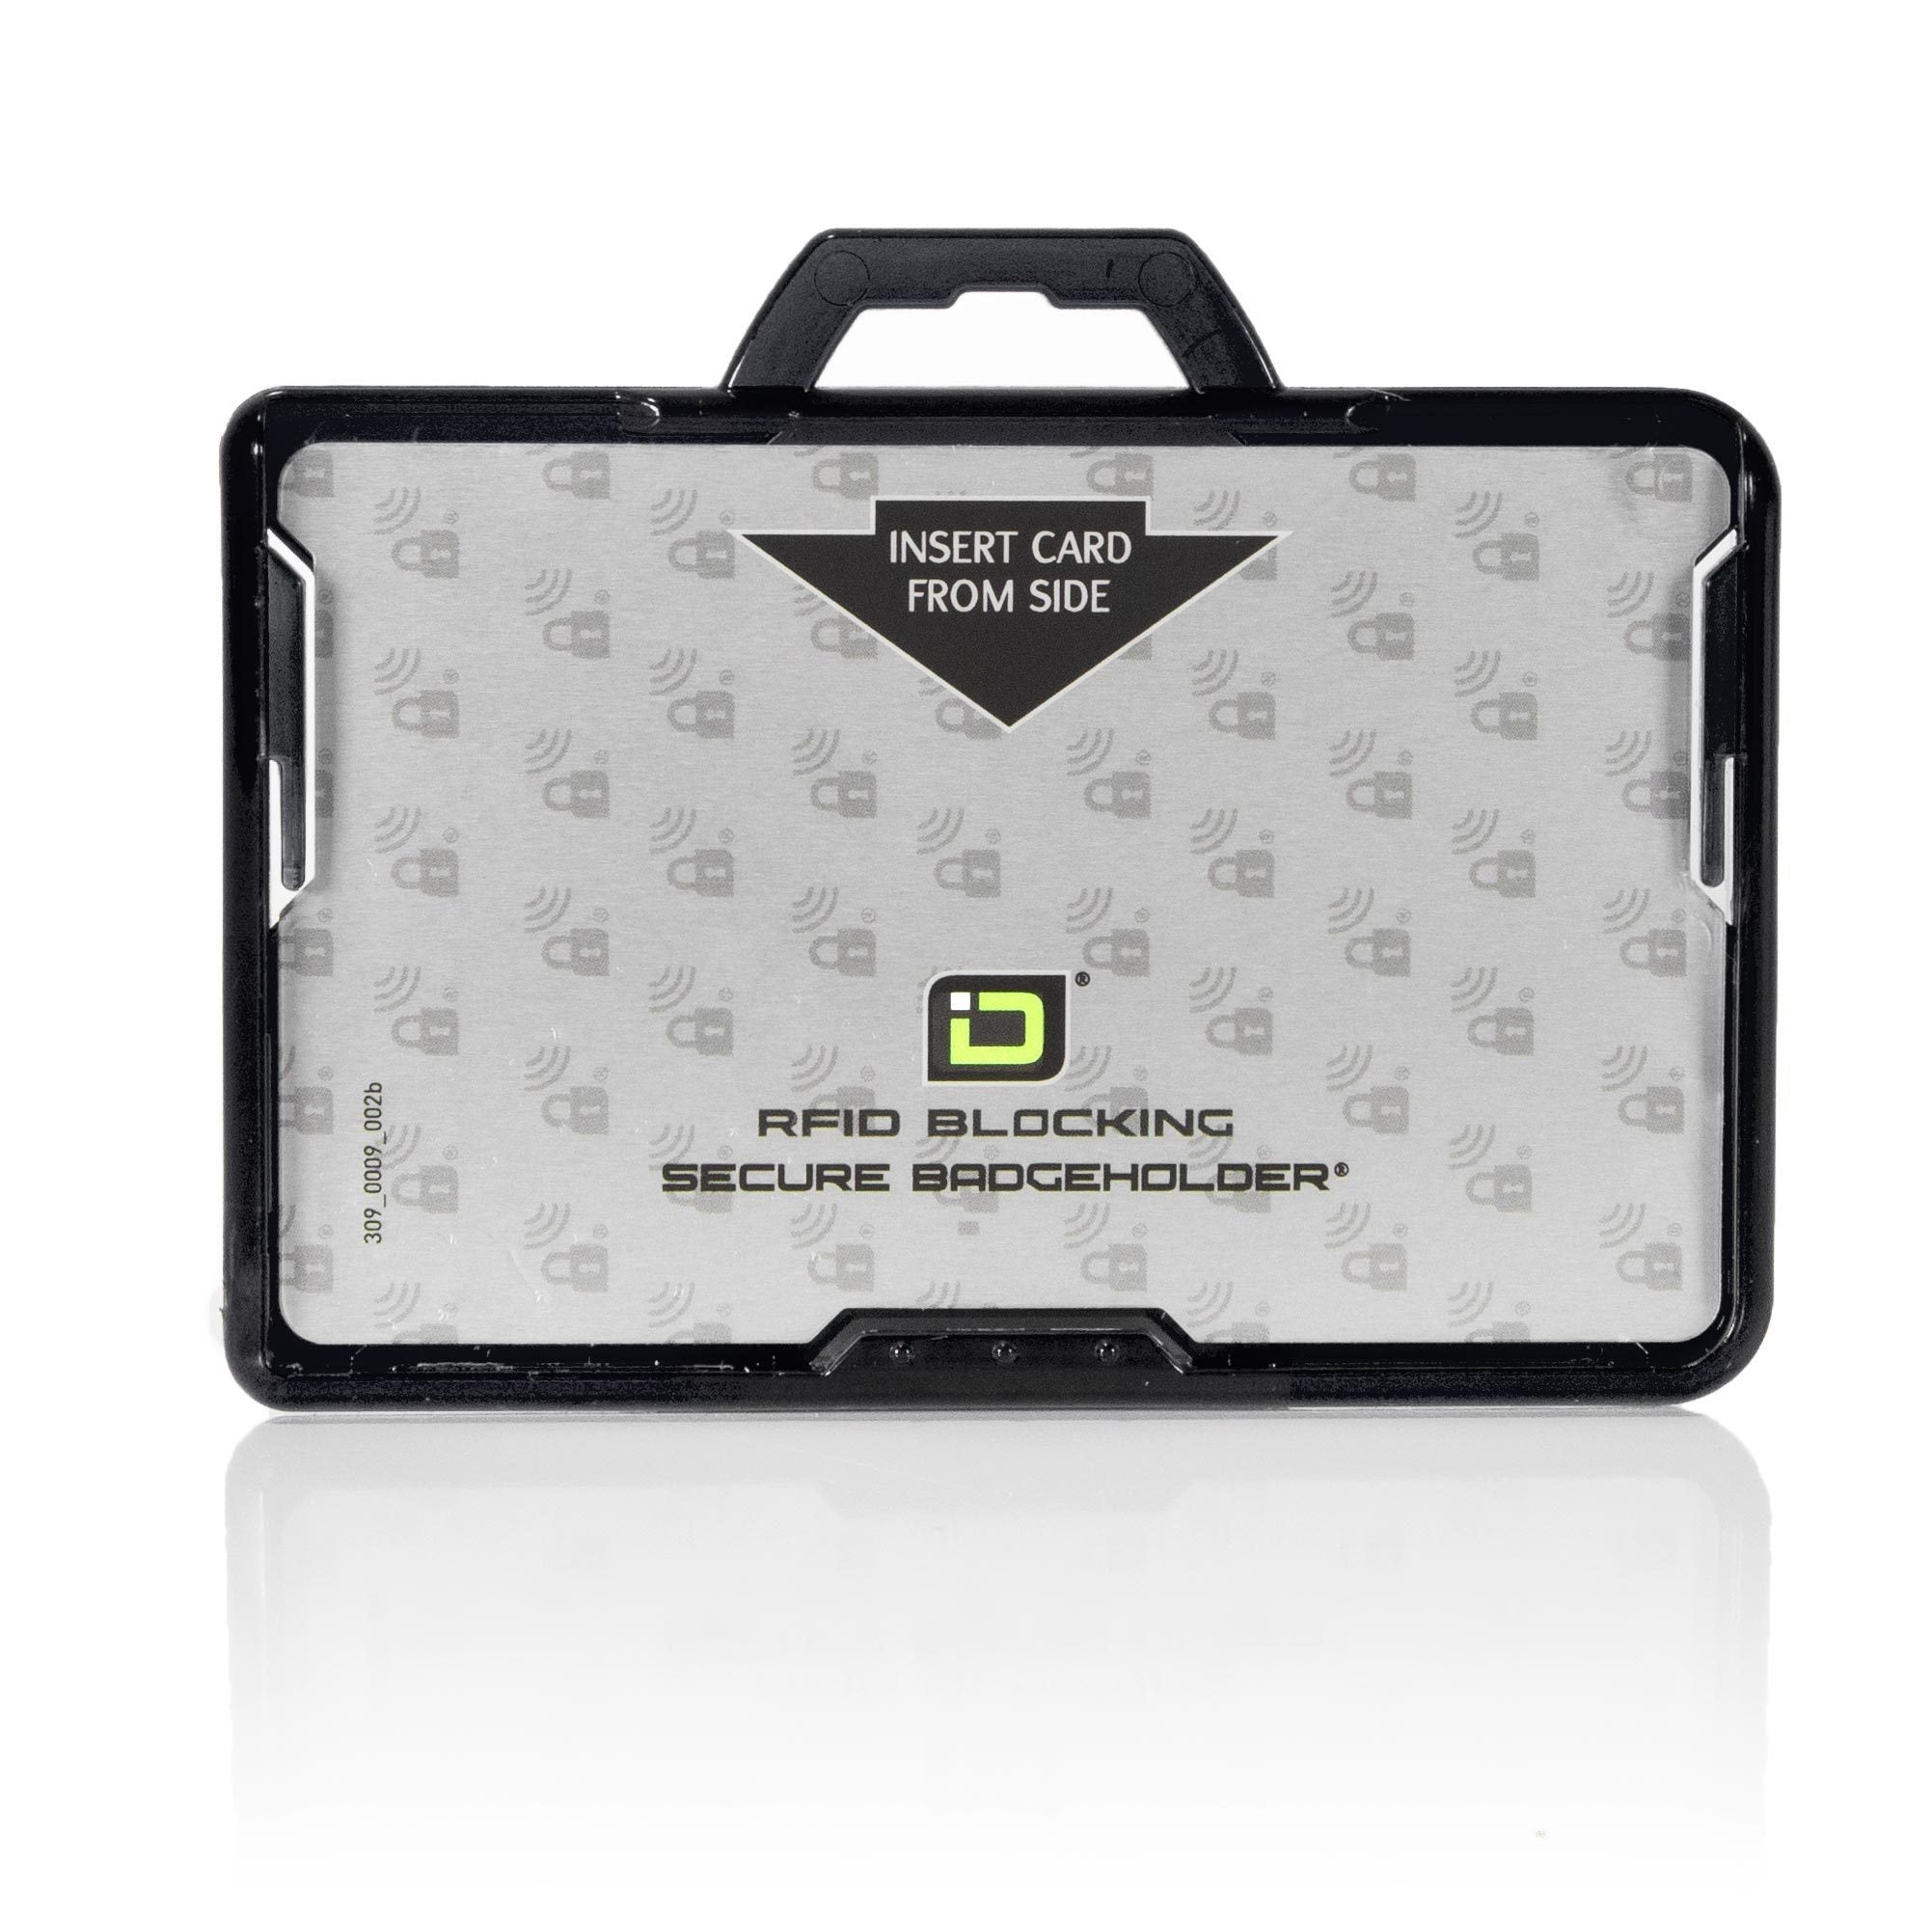 ID Stronghold Badgeholder BloxProx Black Secure Badge Bolder BloxProx™ Lite LANDSCAPE - Protects 125Khz HID Prox